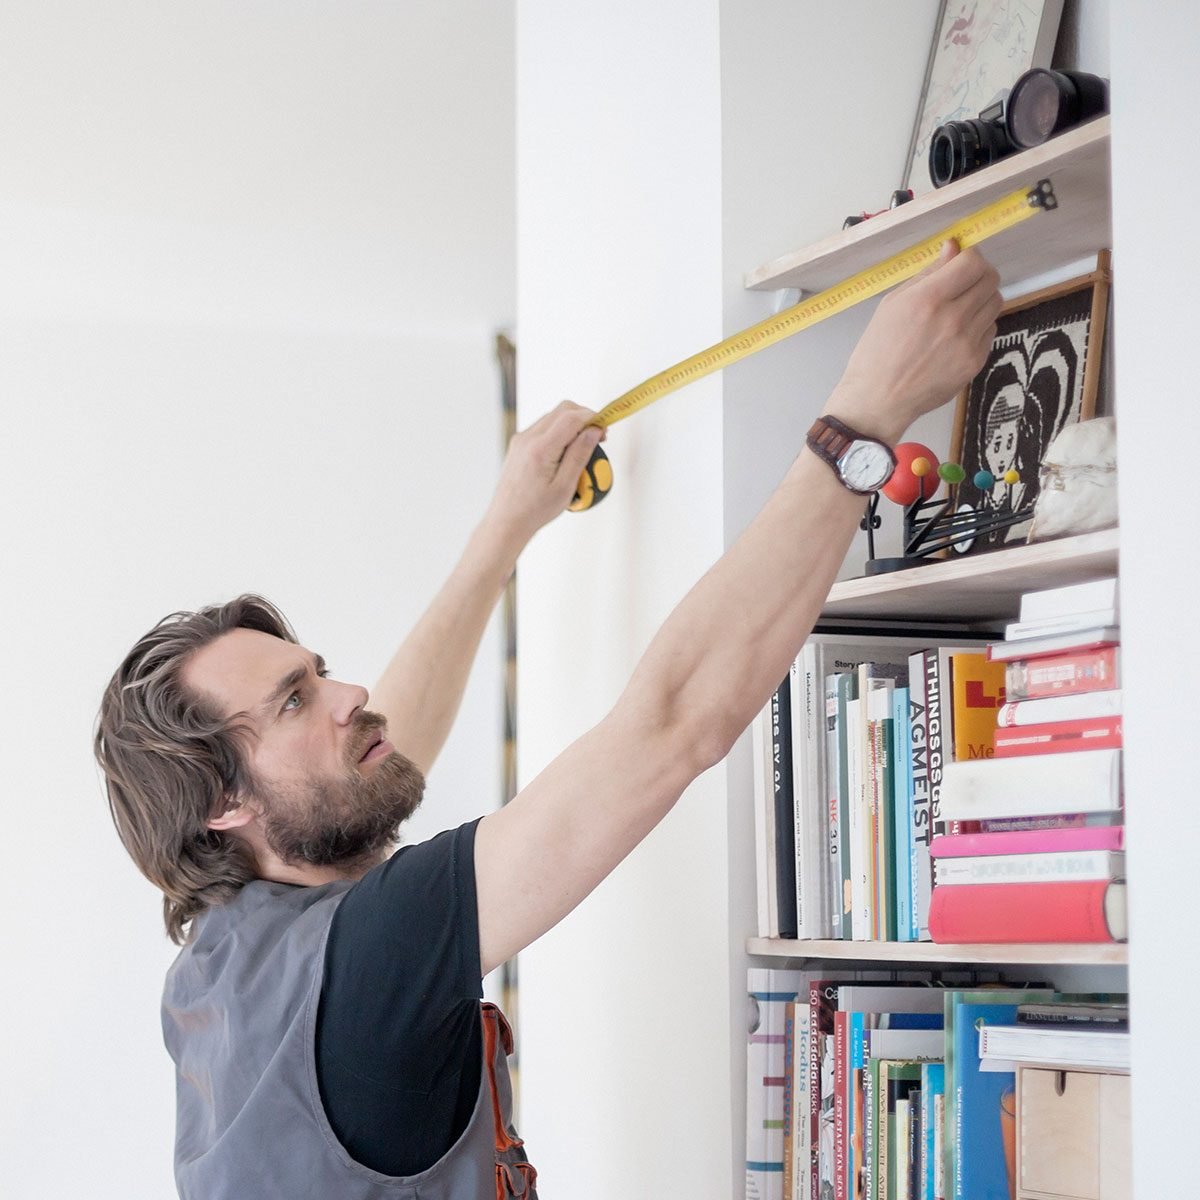 The Best Measuring Tape Tips, According to Professionals